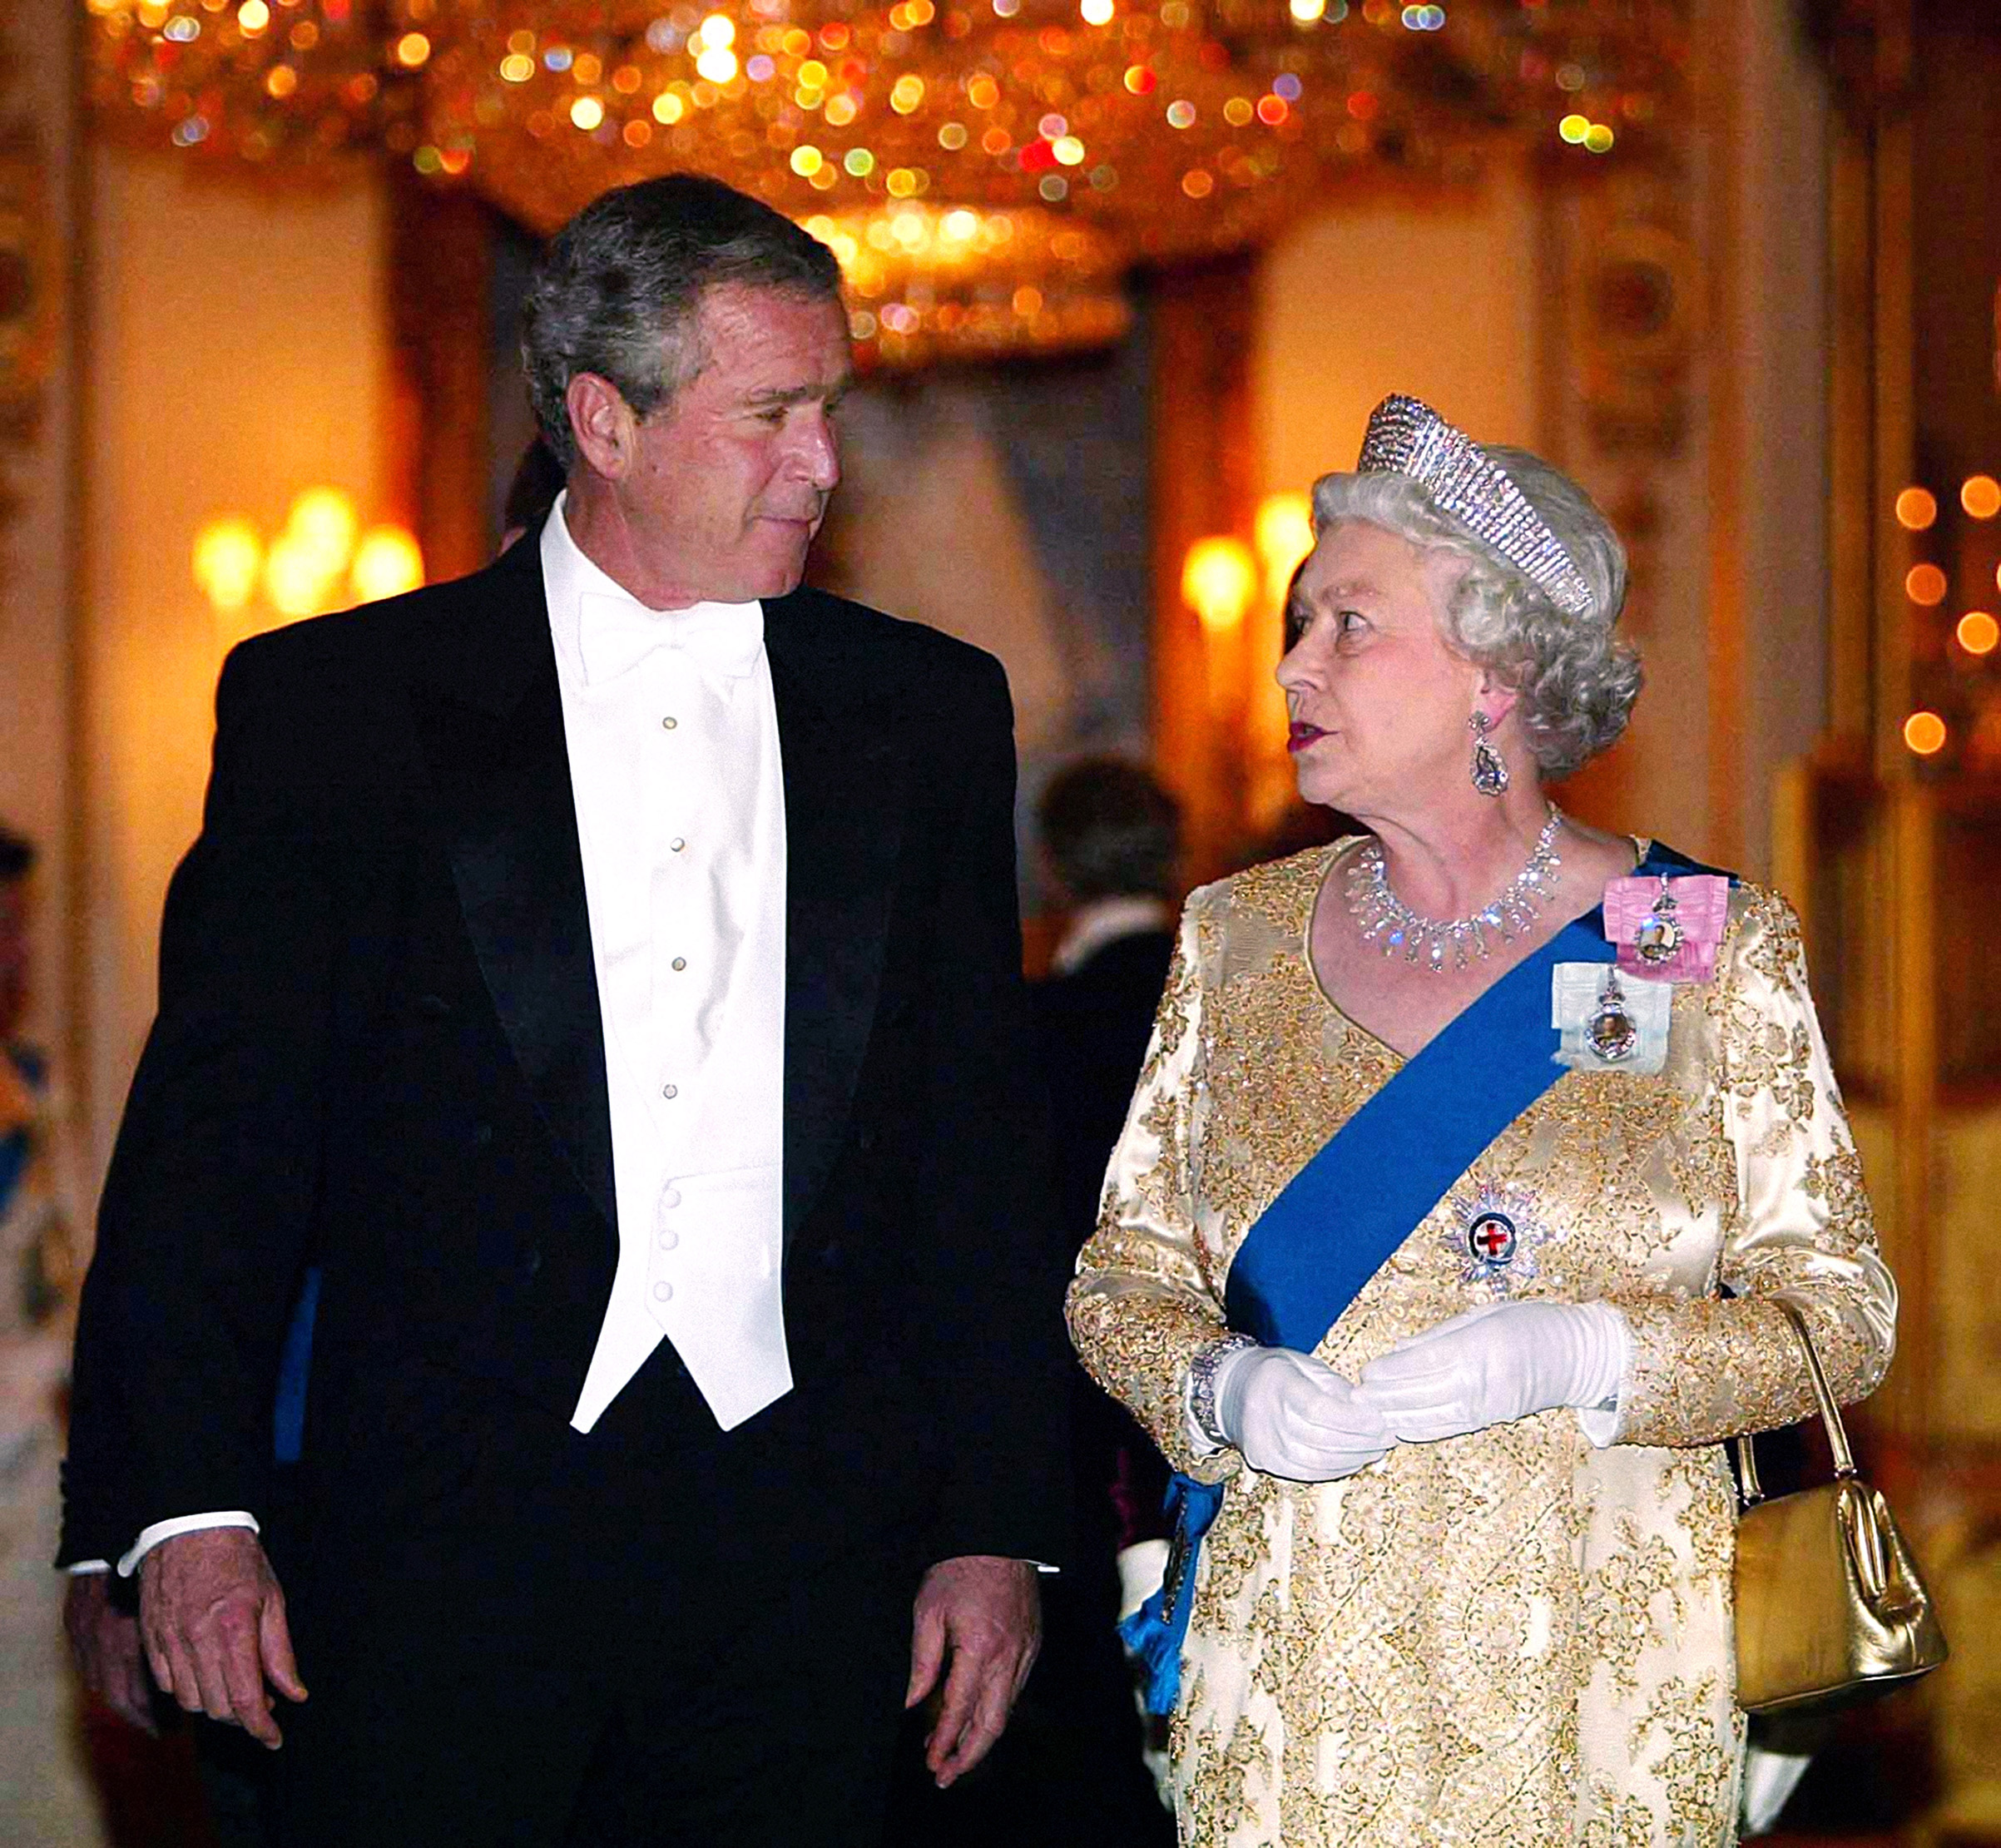 Britain's Queen Elizabeth II arrives with U.S. President George Bush for the Buckingham Palace state banquet in honor of the U.S. President, during the first day of his four-day state visit to the U.K. on Nov. 19, 2003. (PA Images—Getty Images)